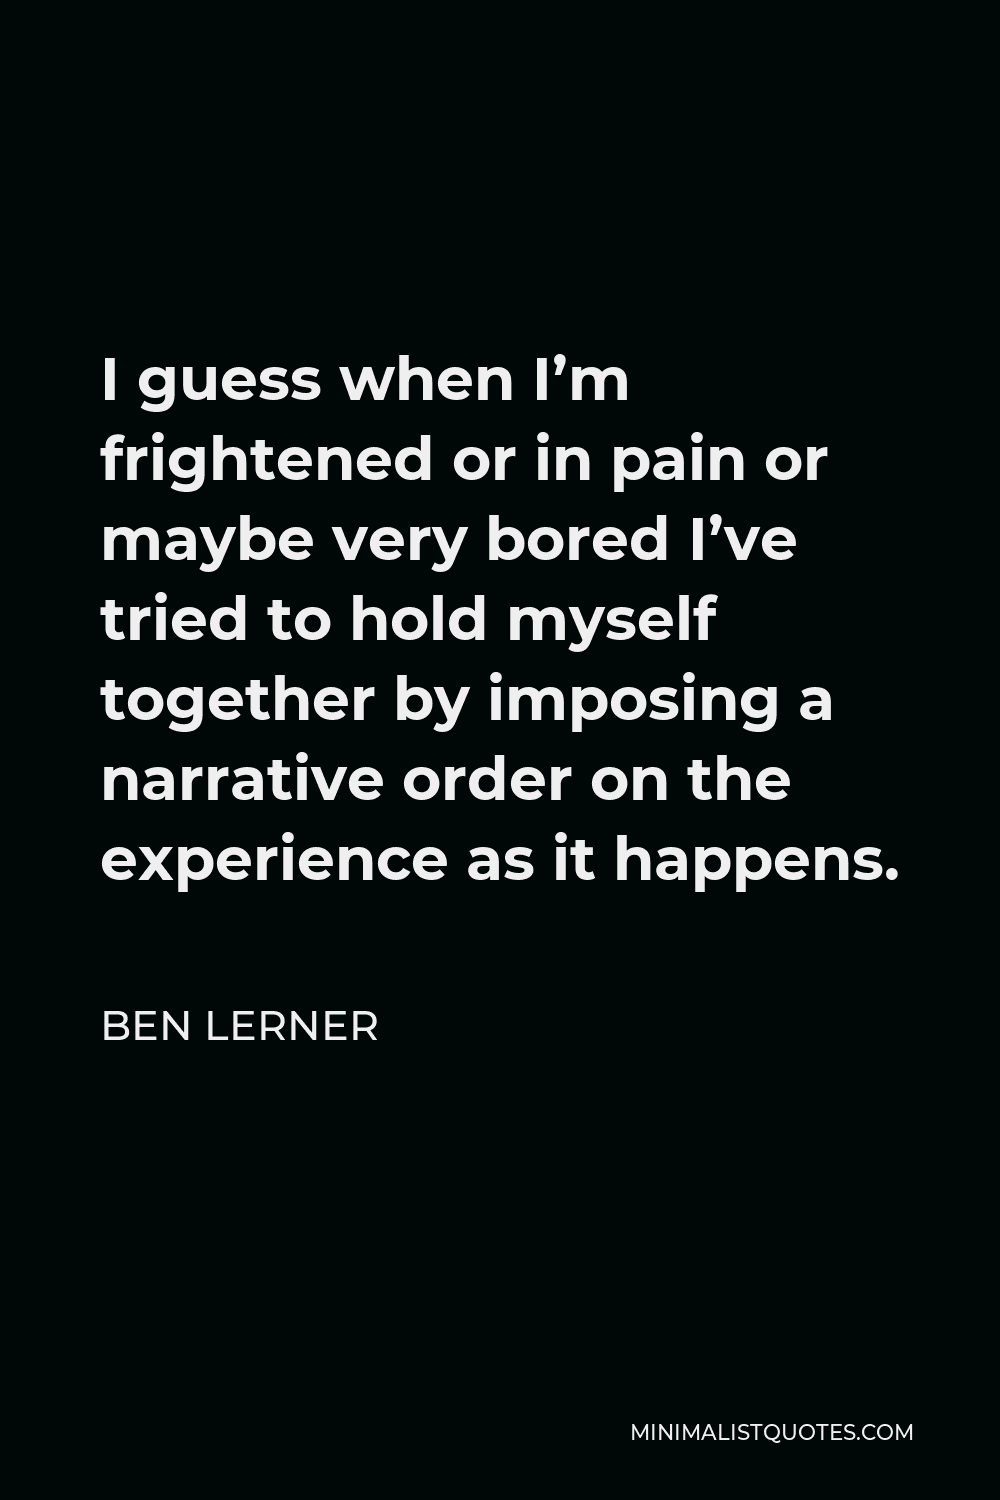 Ben Lerner Quote - I guess when I’m frightened or in pain or maybe very bored I’ve tried to hold myself together by imposing a narrative order on the experience as it happens.